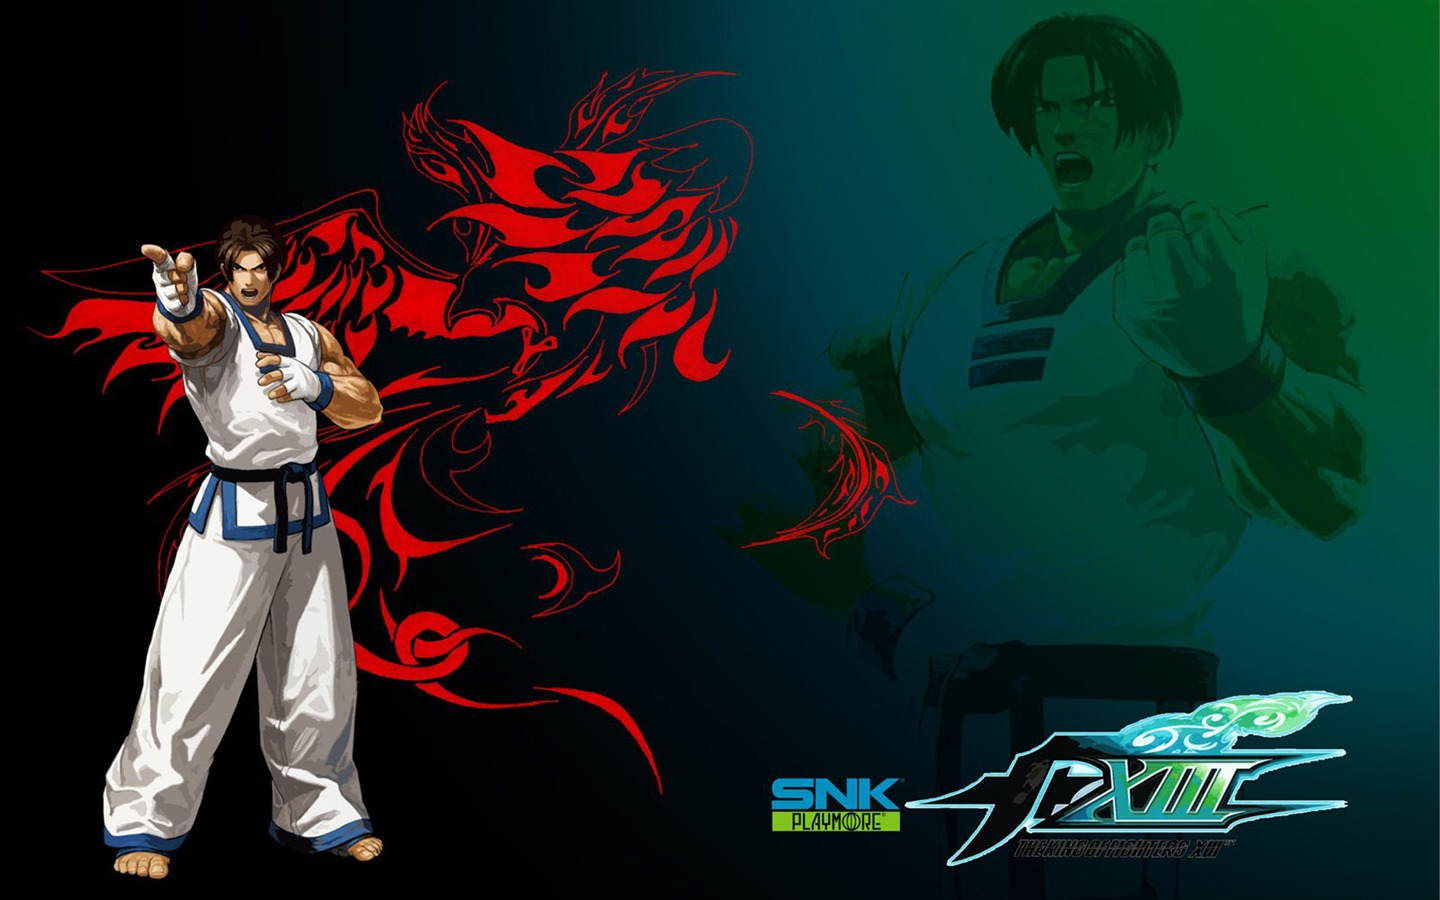 Le roi de wallpapers Fighters XIII #14 - 1440x900